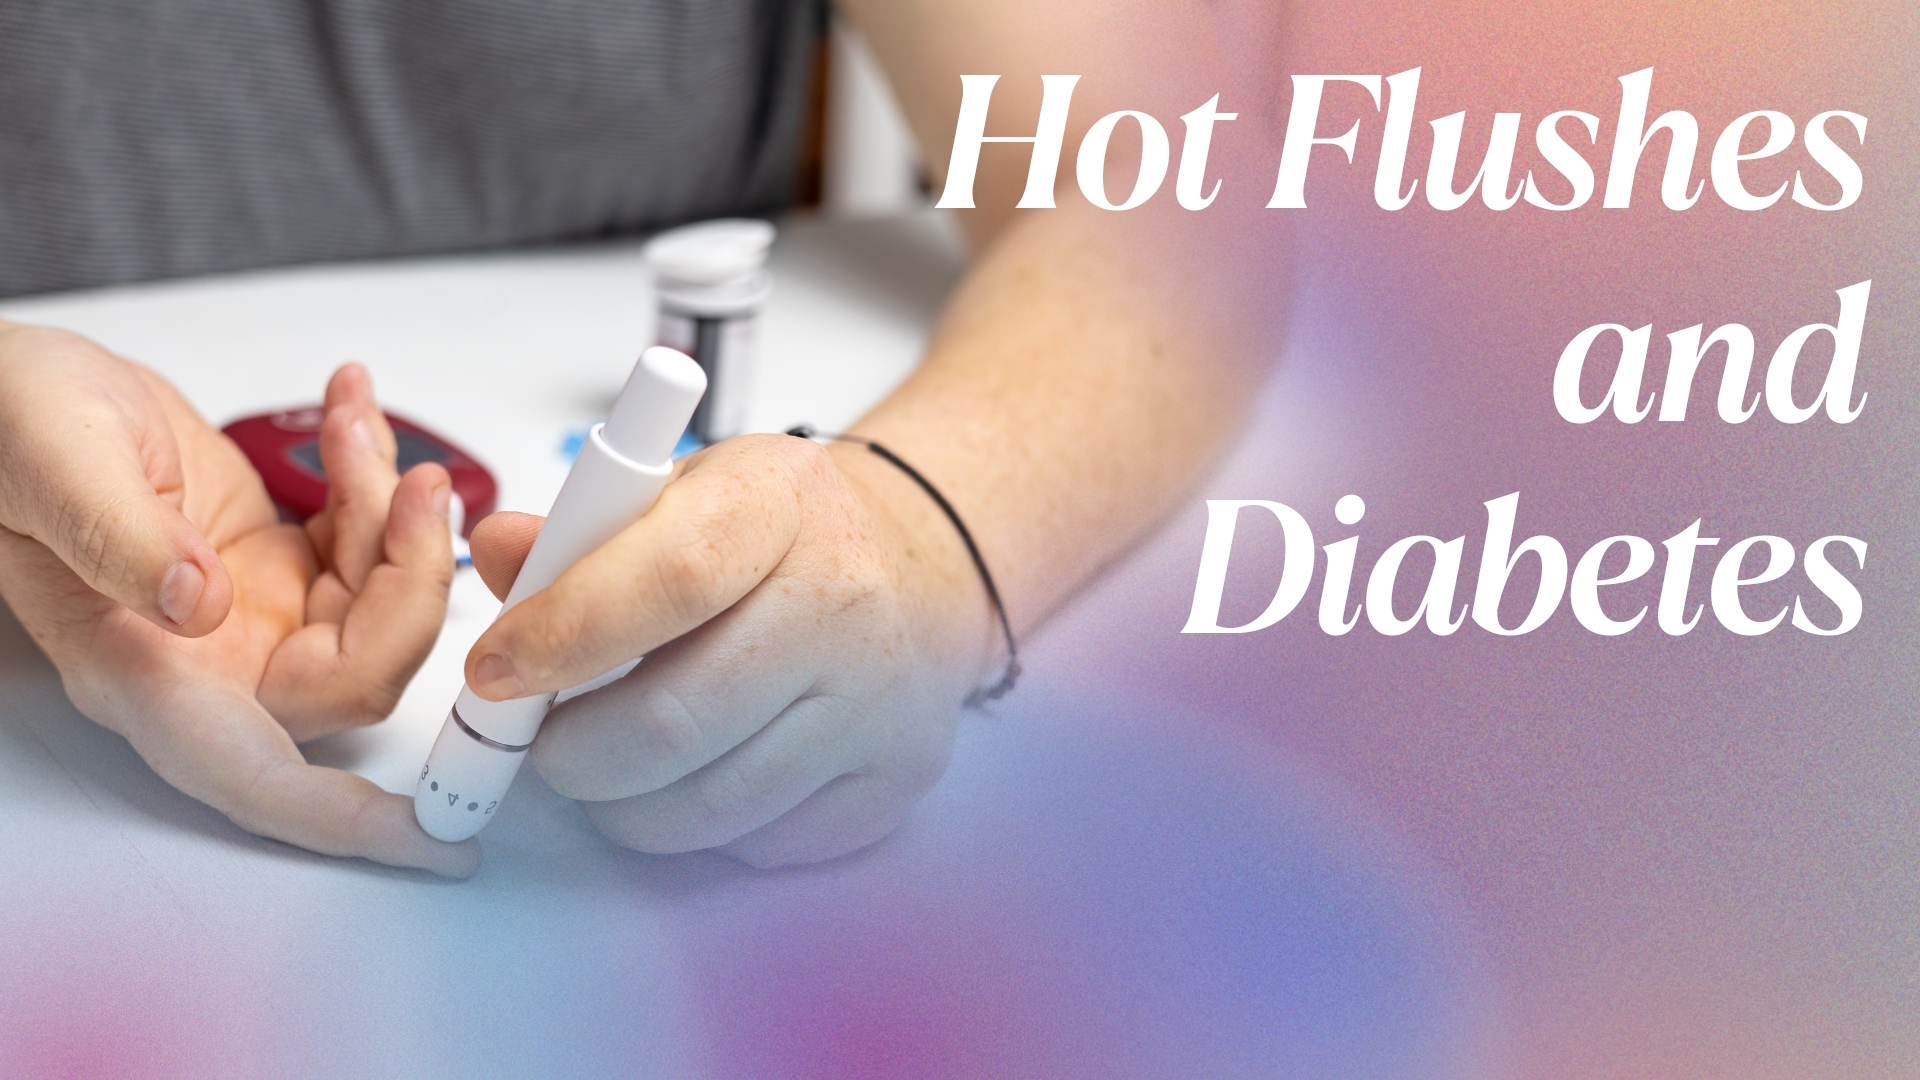 Hot Flushes and Diabetes